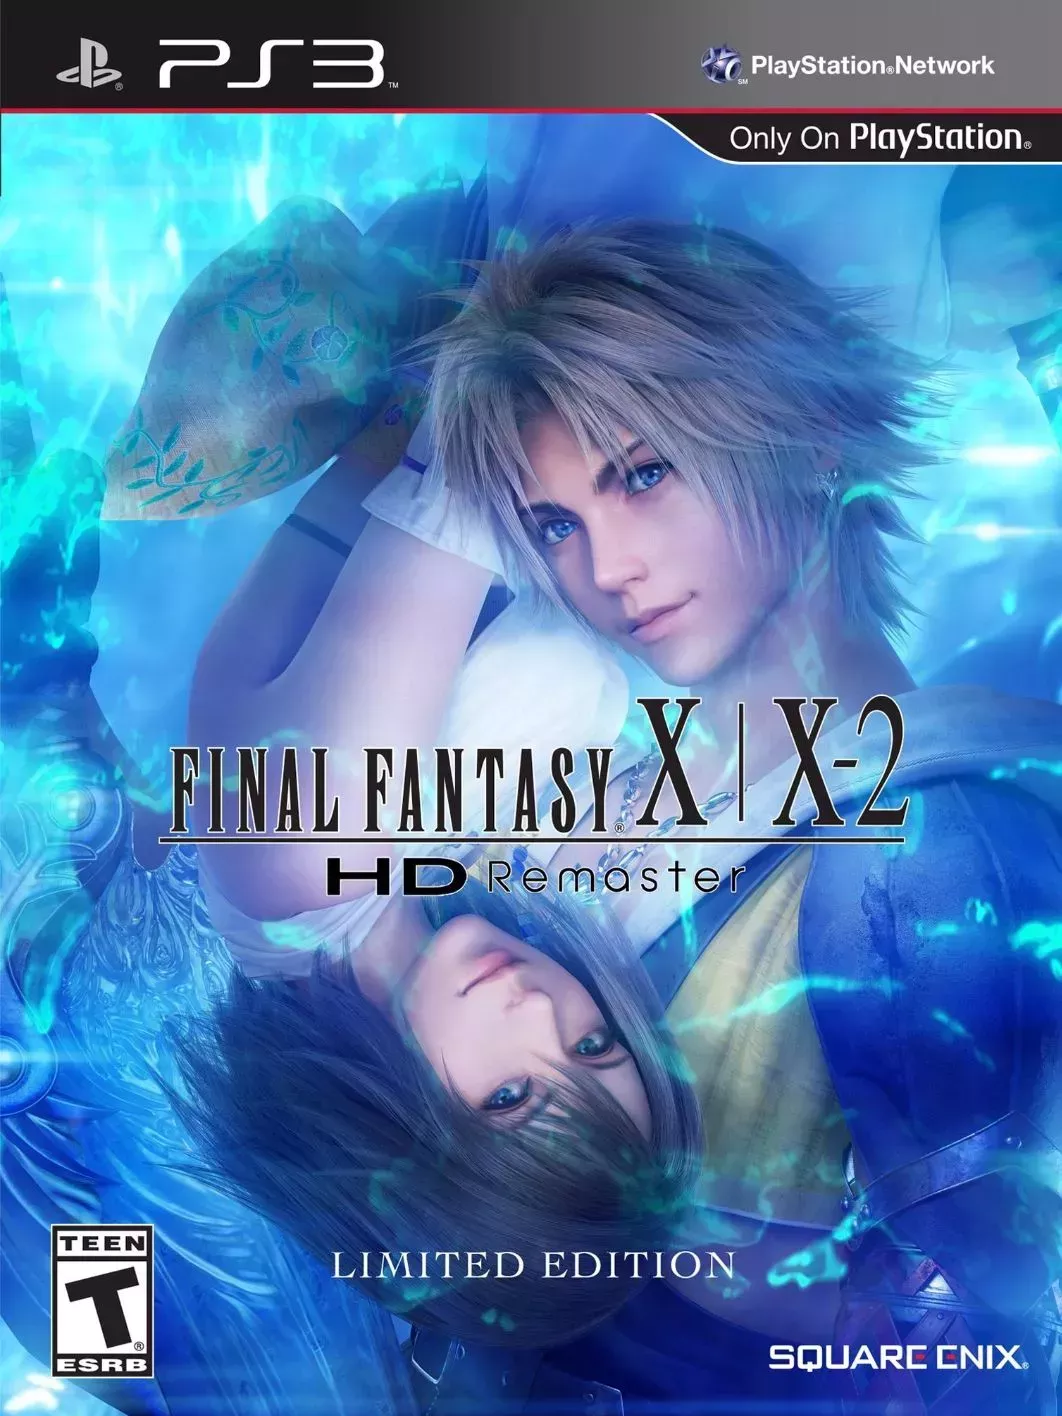 Final Fantasy X|X-2 HD Remaster video game poster